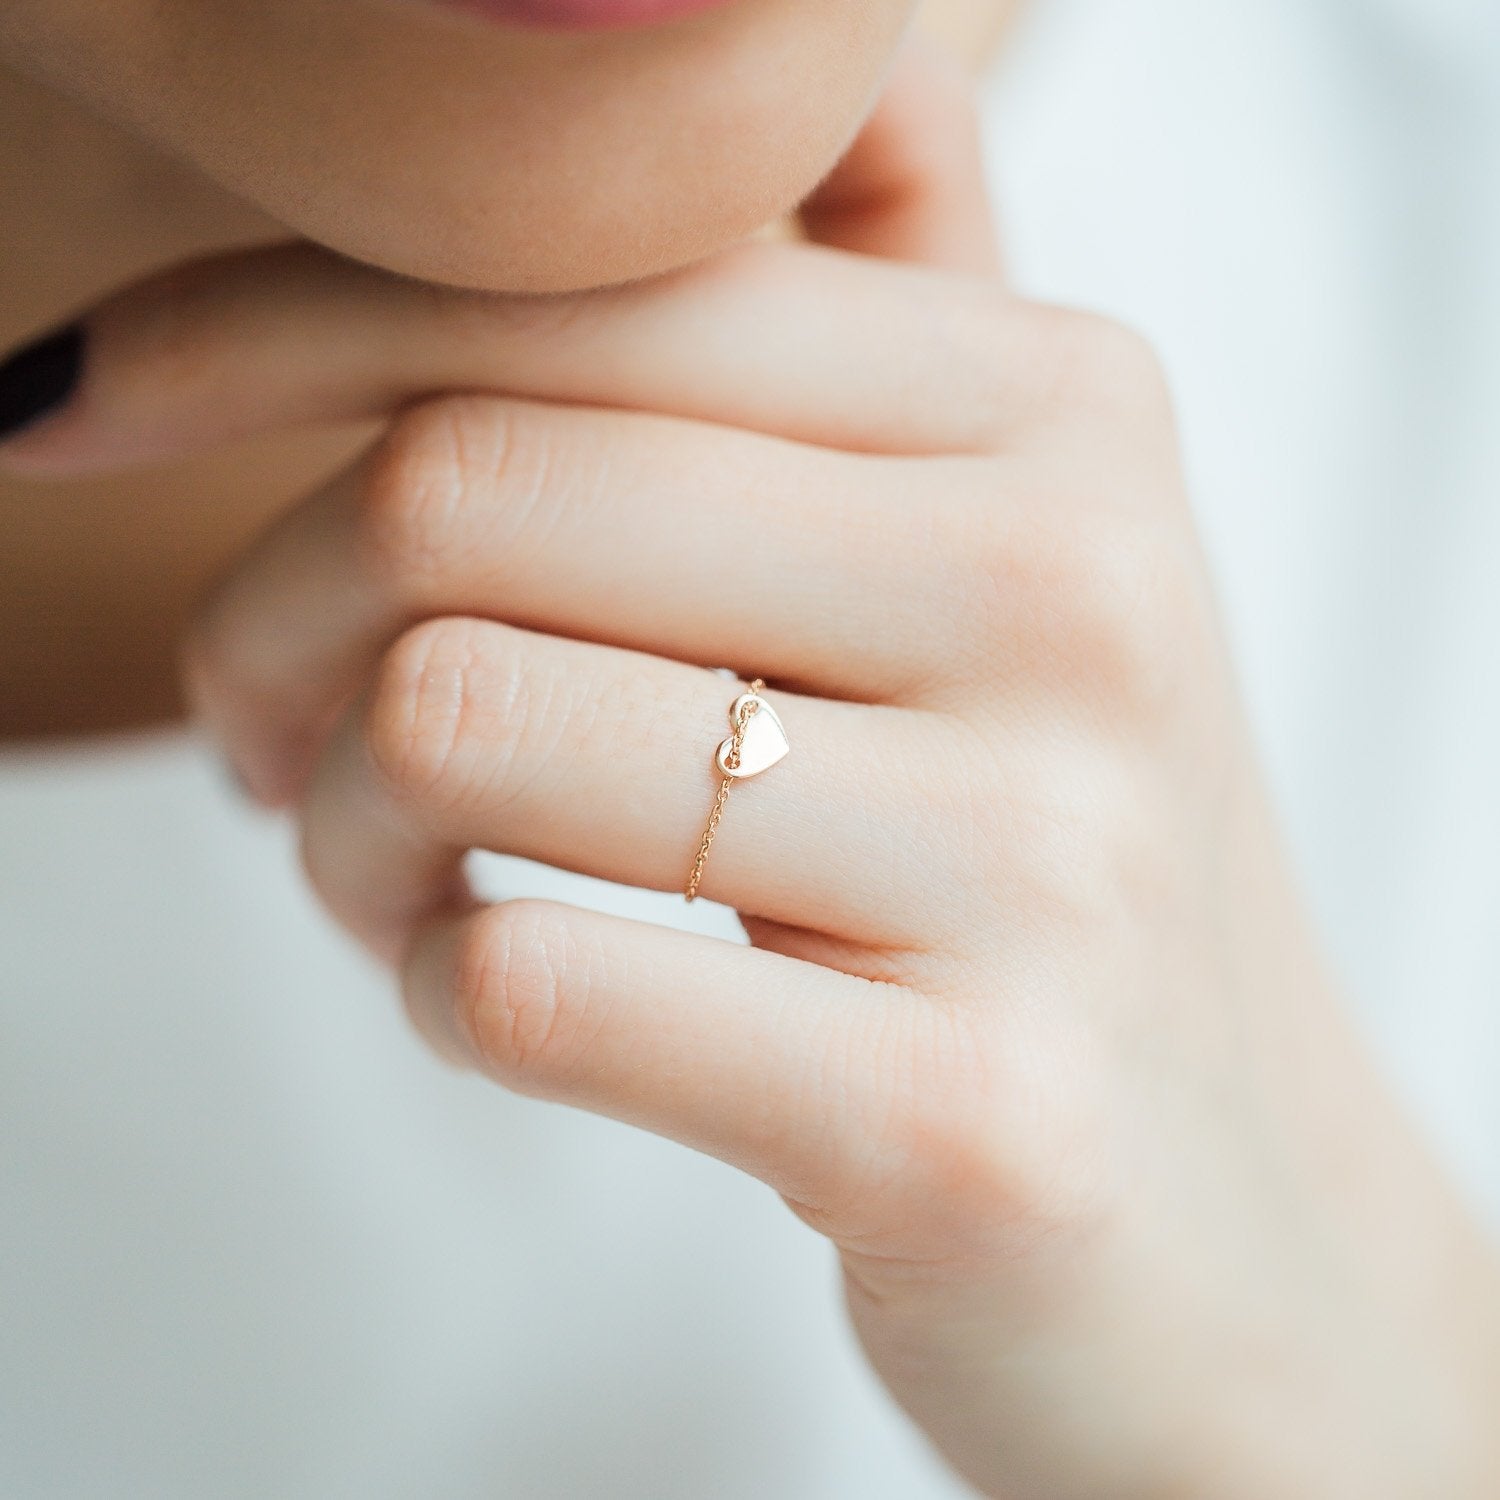 Why Are Small Engagement Rings Better?